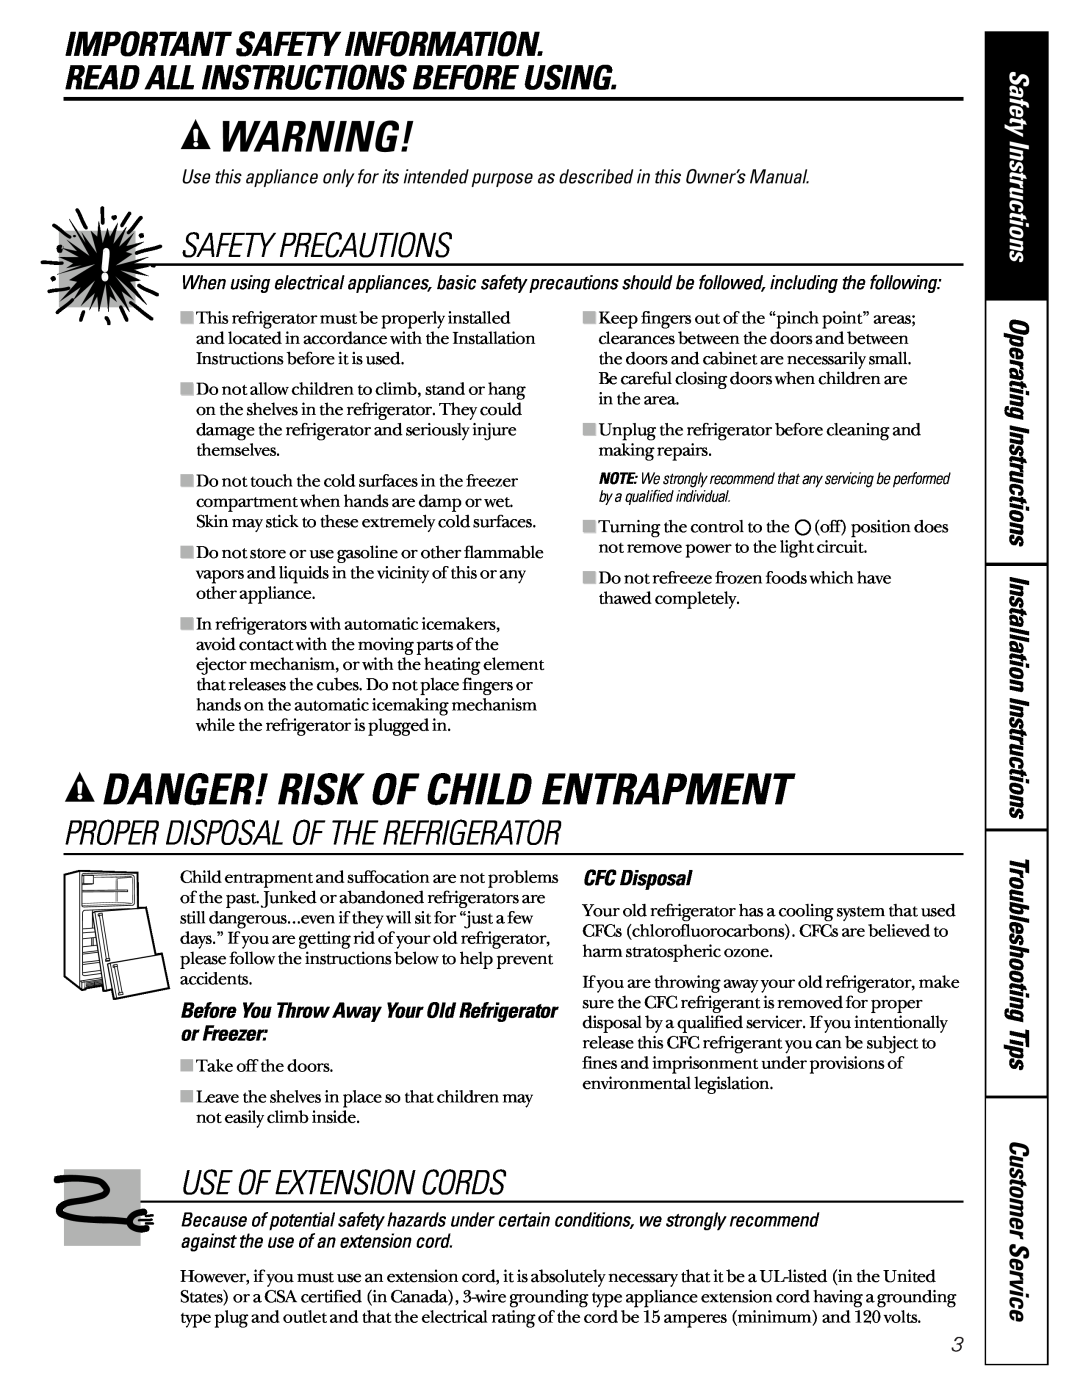 GE 162D6733P007 Danger! Risk Of Child Entrapment, Important Safety Information Read All Instructions Before Using 